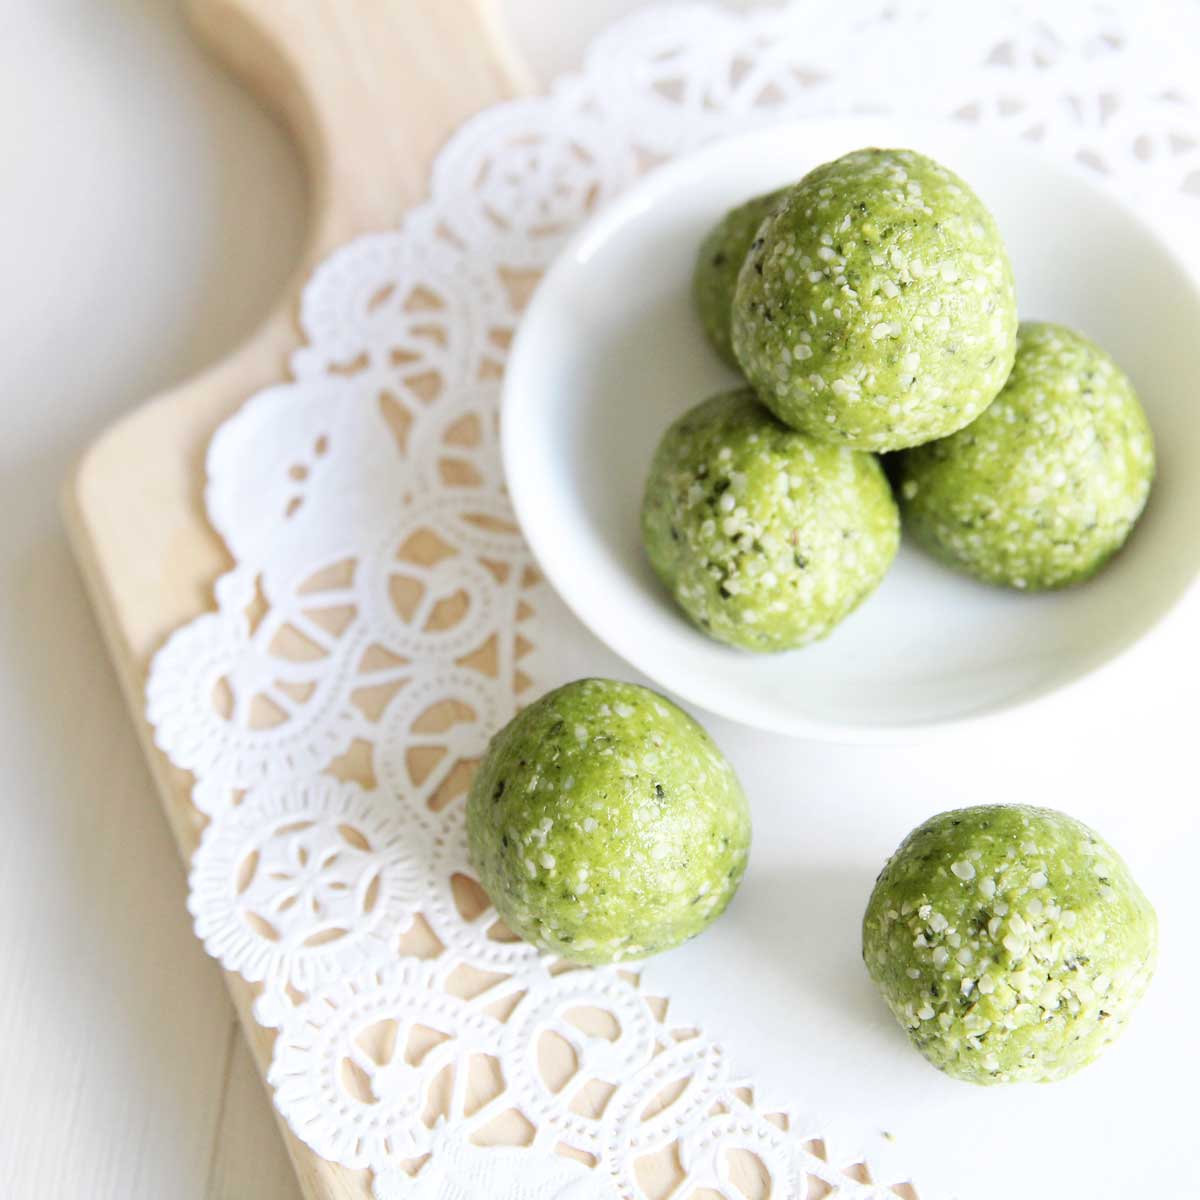 Power Packed Matcha Latte Protein Balls Recipe with Collagen Peptides - yeast bread